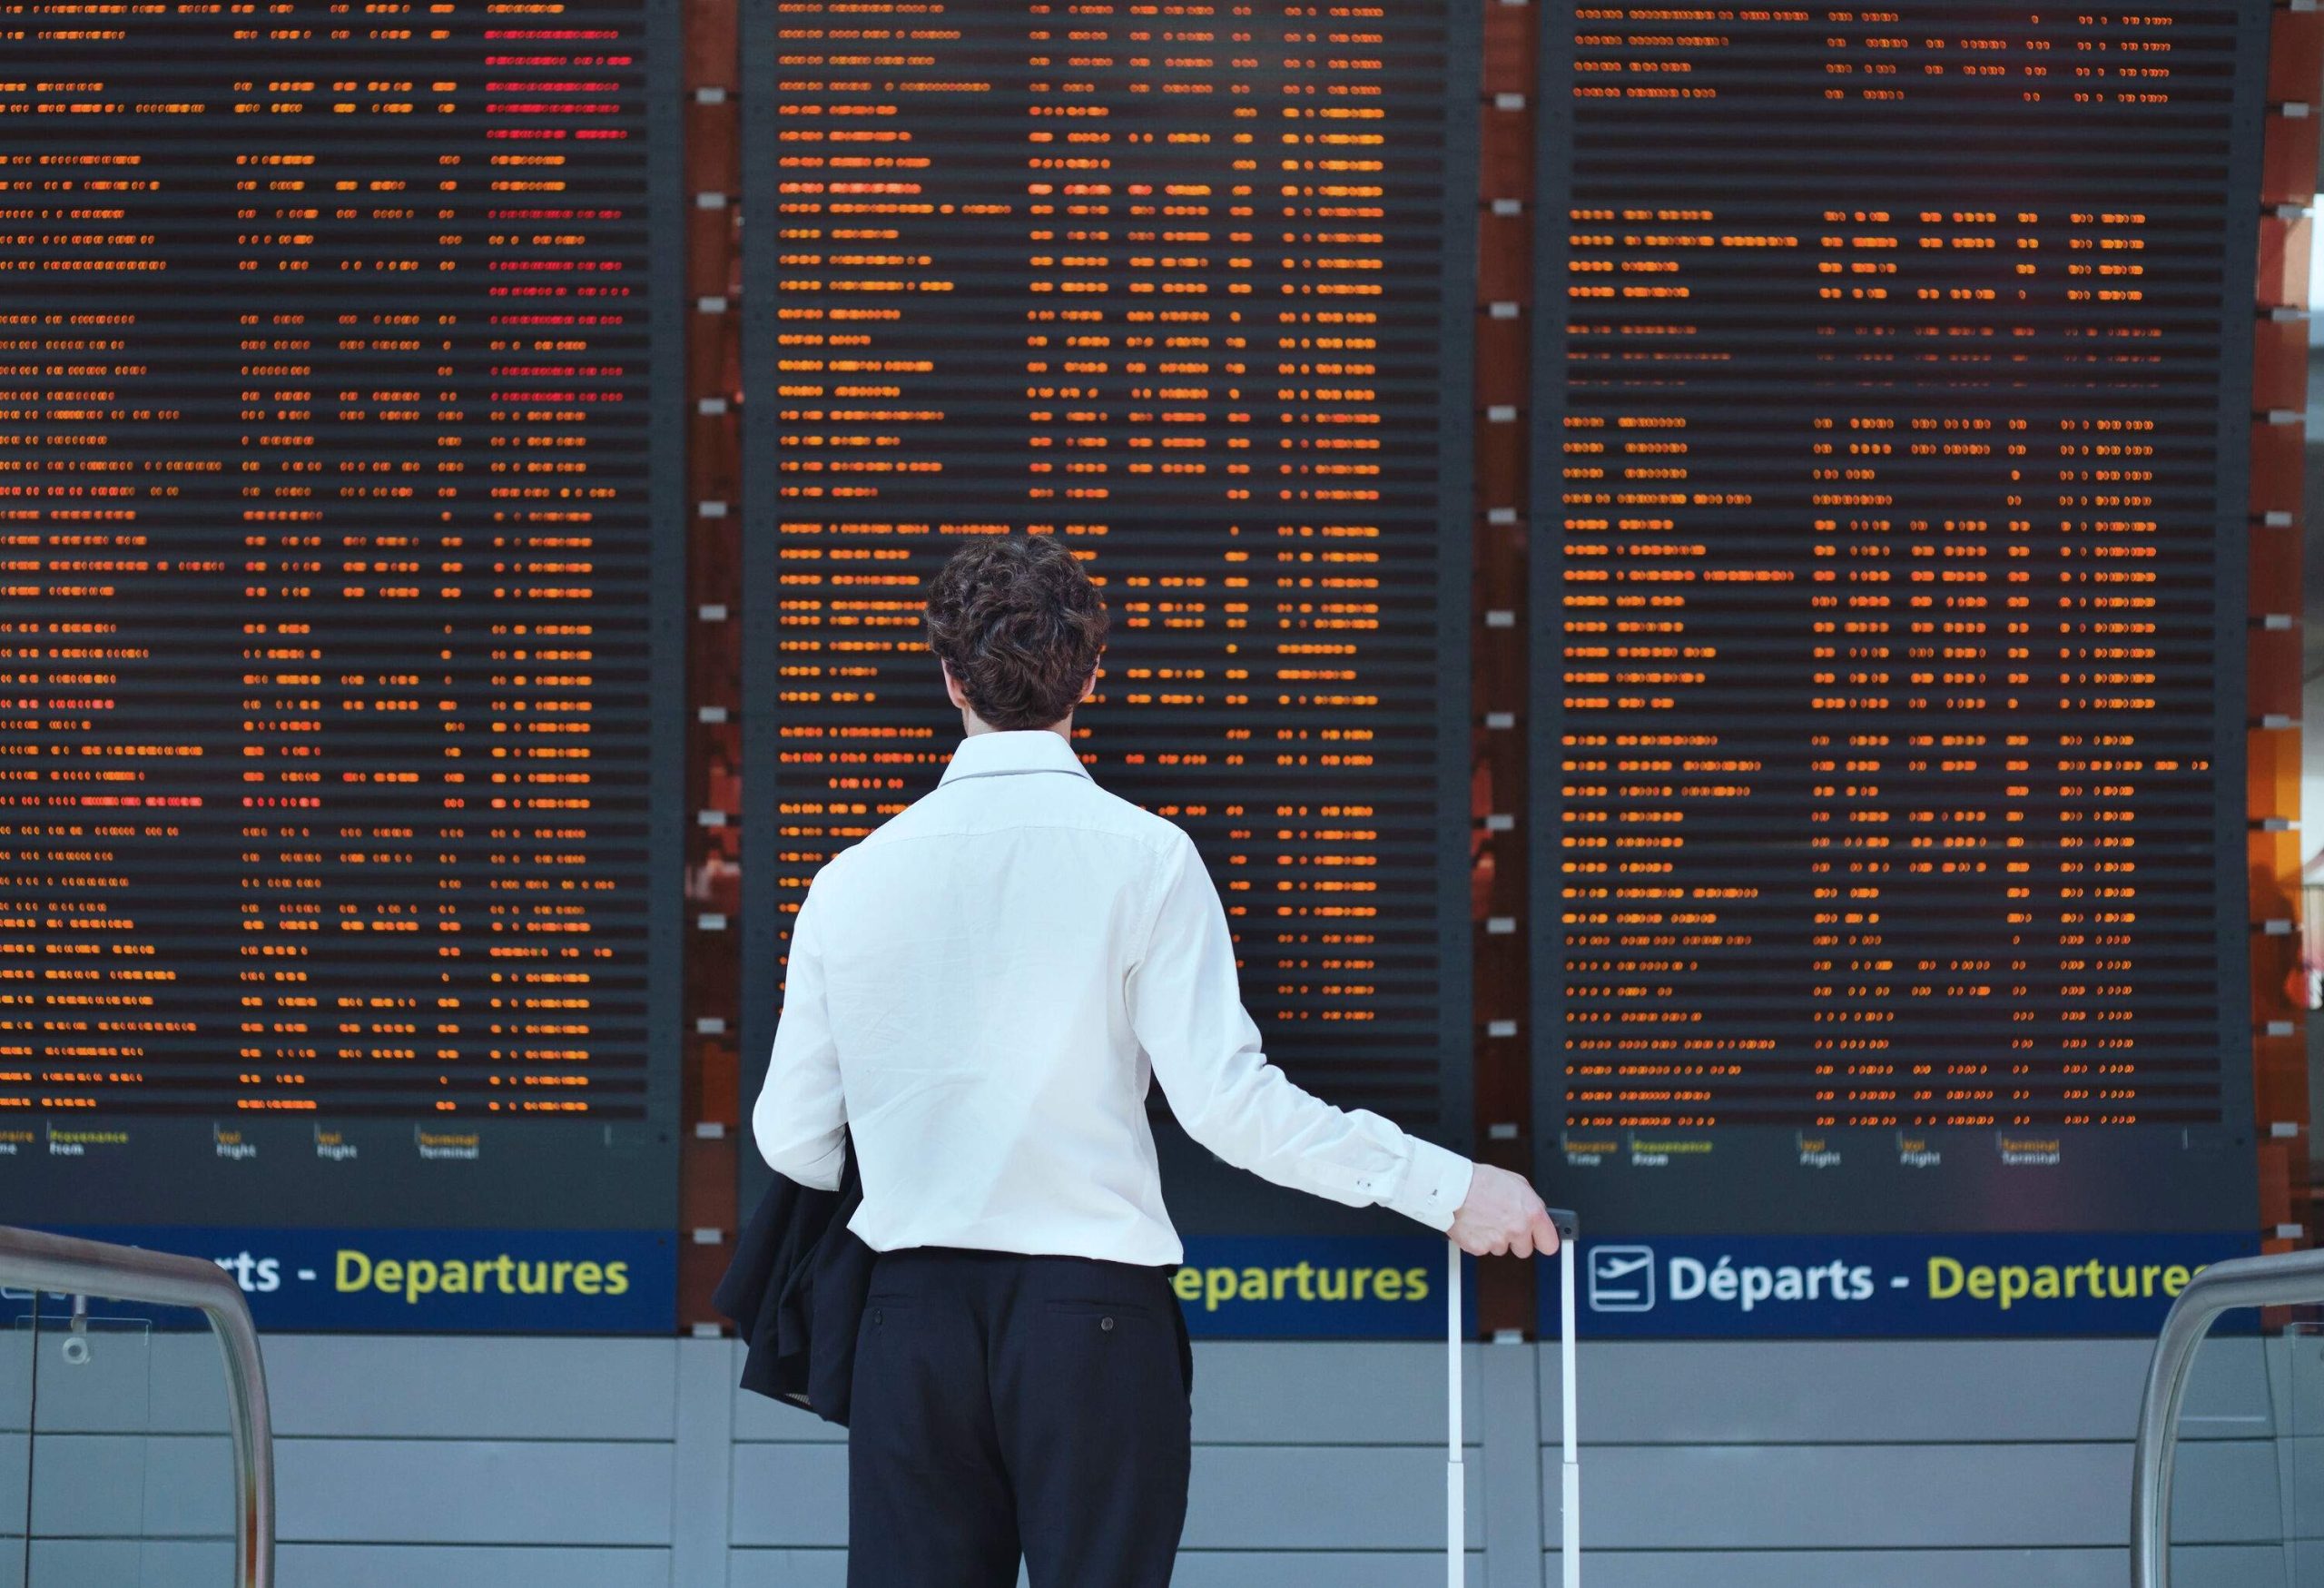 A passenger with luggage checking the flight information display system at the airport for flight details.